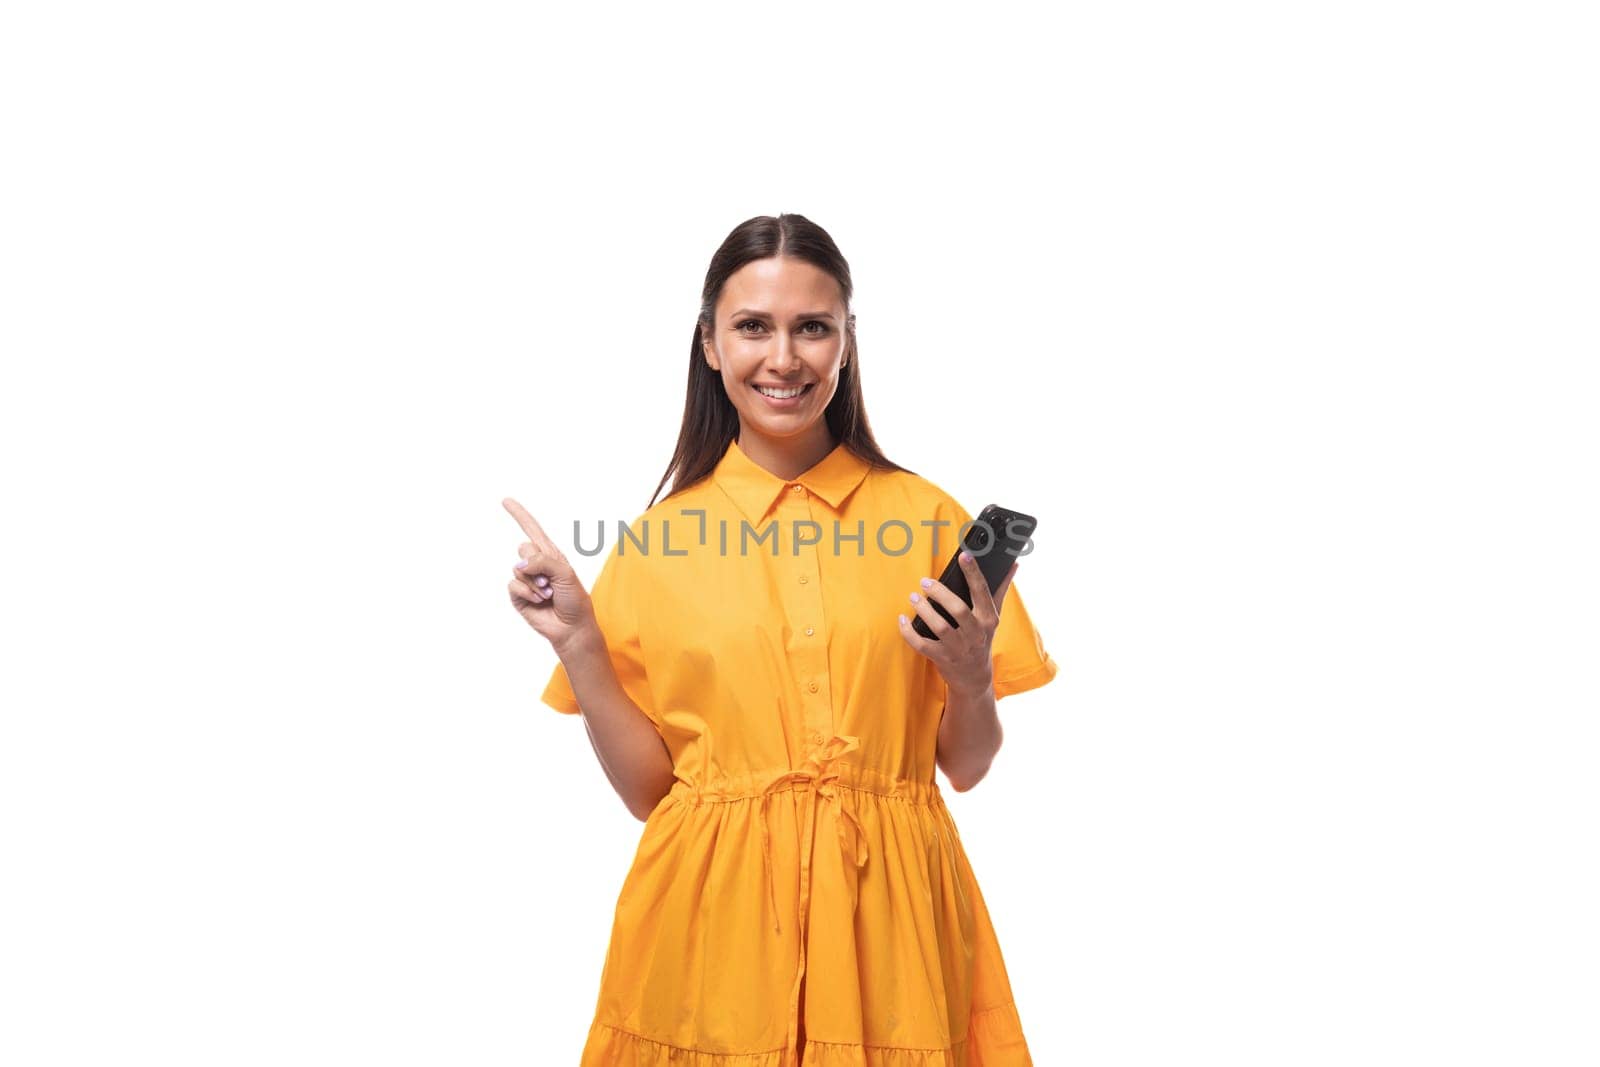 pretty young brunette lady dressed in a bright yellow dress on vacation smiling joyfully holding a phone in her hand.